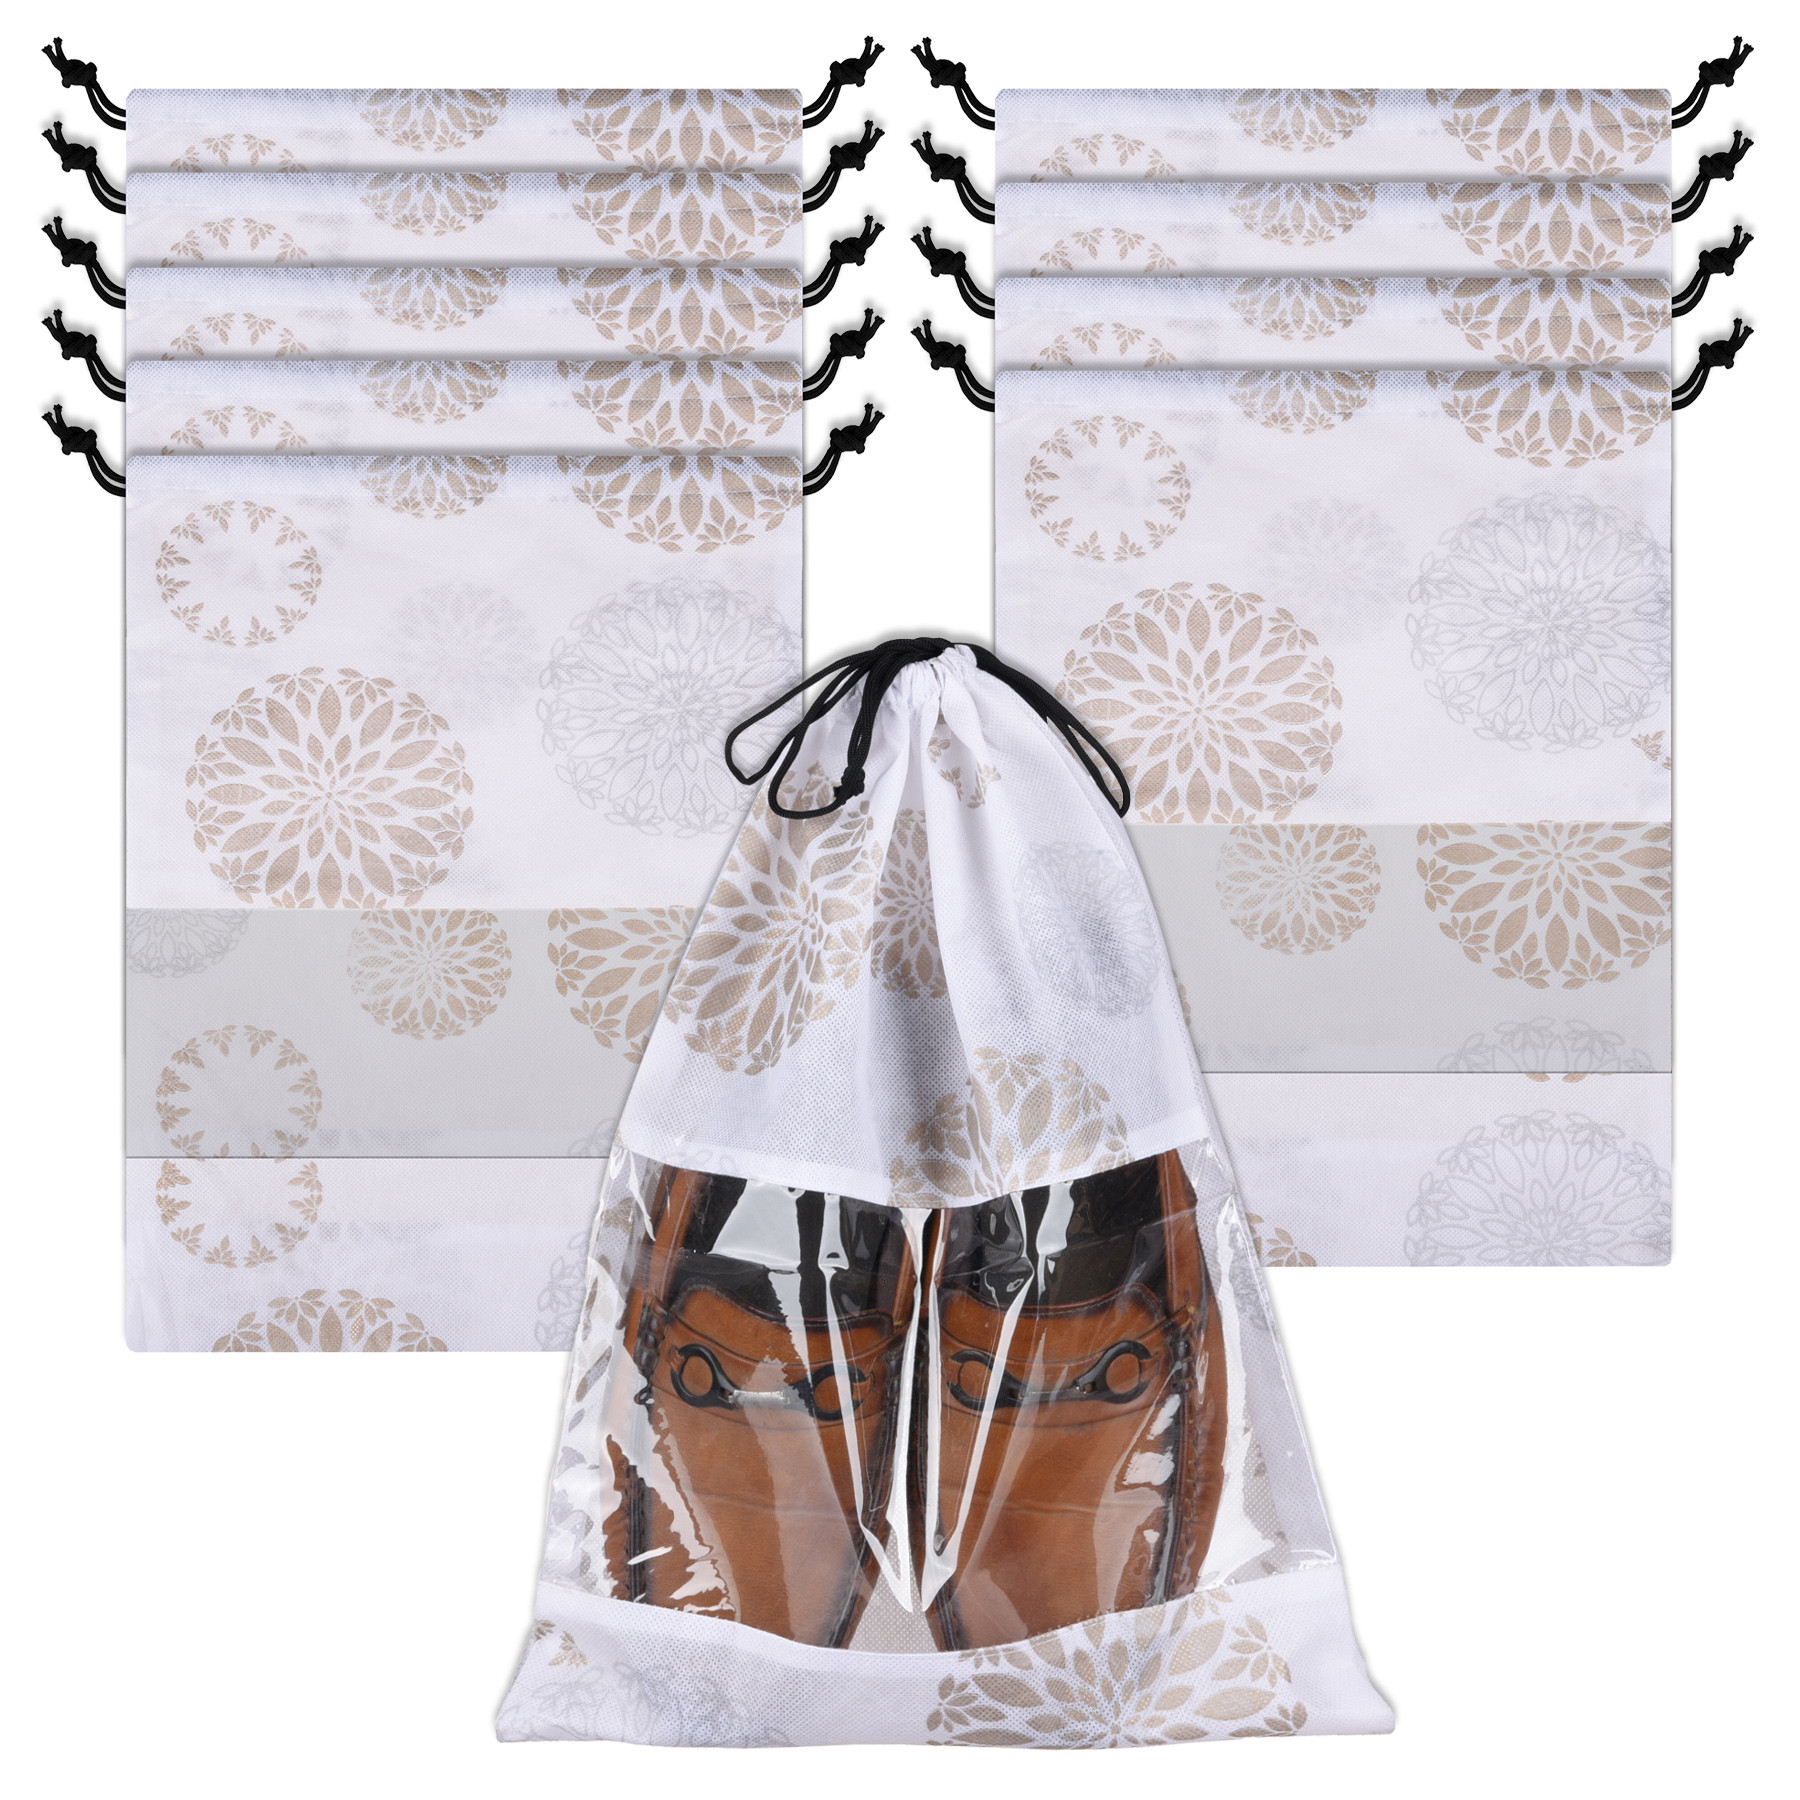 Kuber Industries Shoe Bags | Shoe Bags for Travel | Drawstring Shoe Storage Bags | Storage Organizers Set | Shoe Cover with Transparent Window | Shoe Pouches | Gola-Print |White